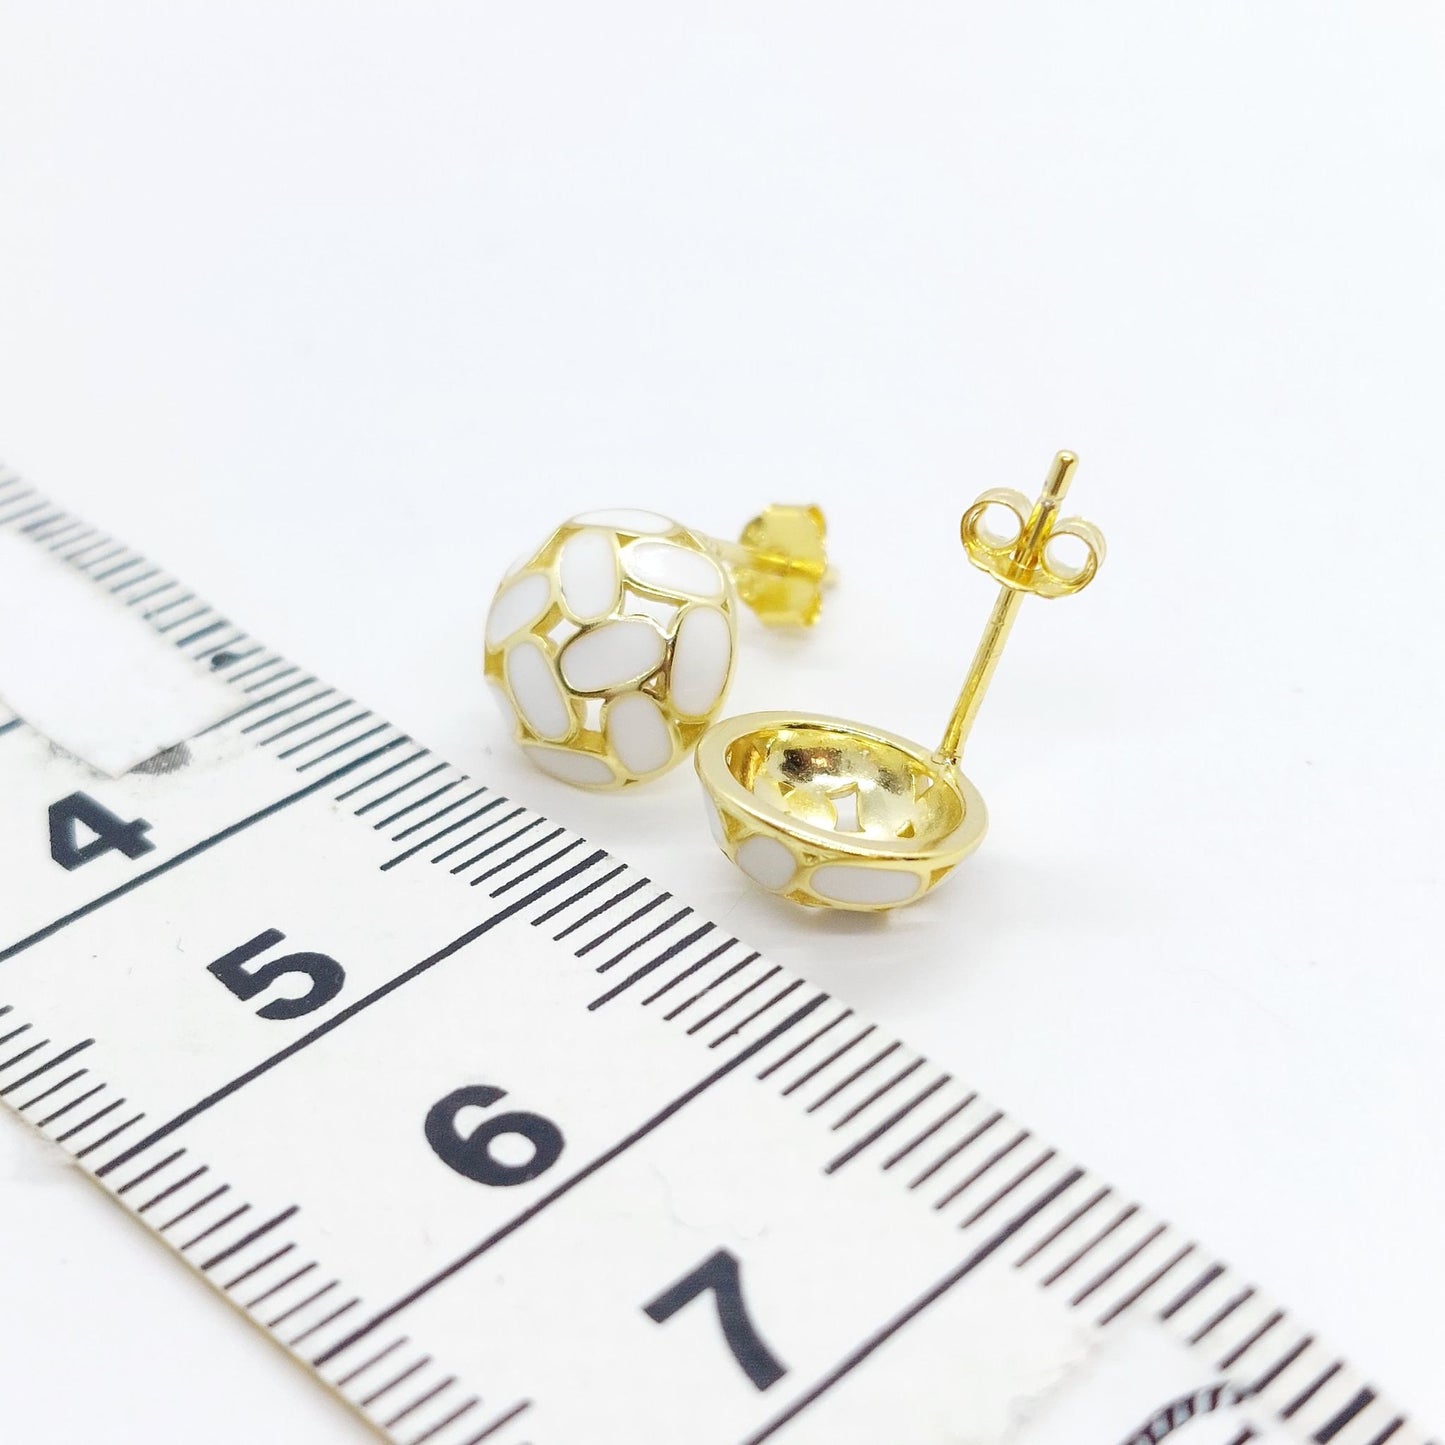 Round Stud Earrings - Sterling Silver Gold Plated